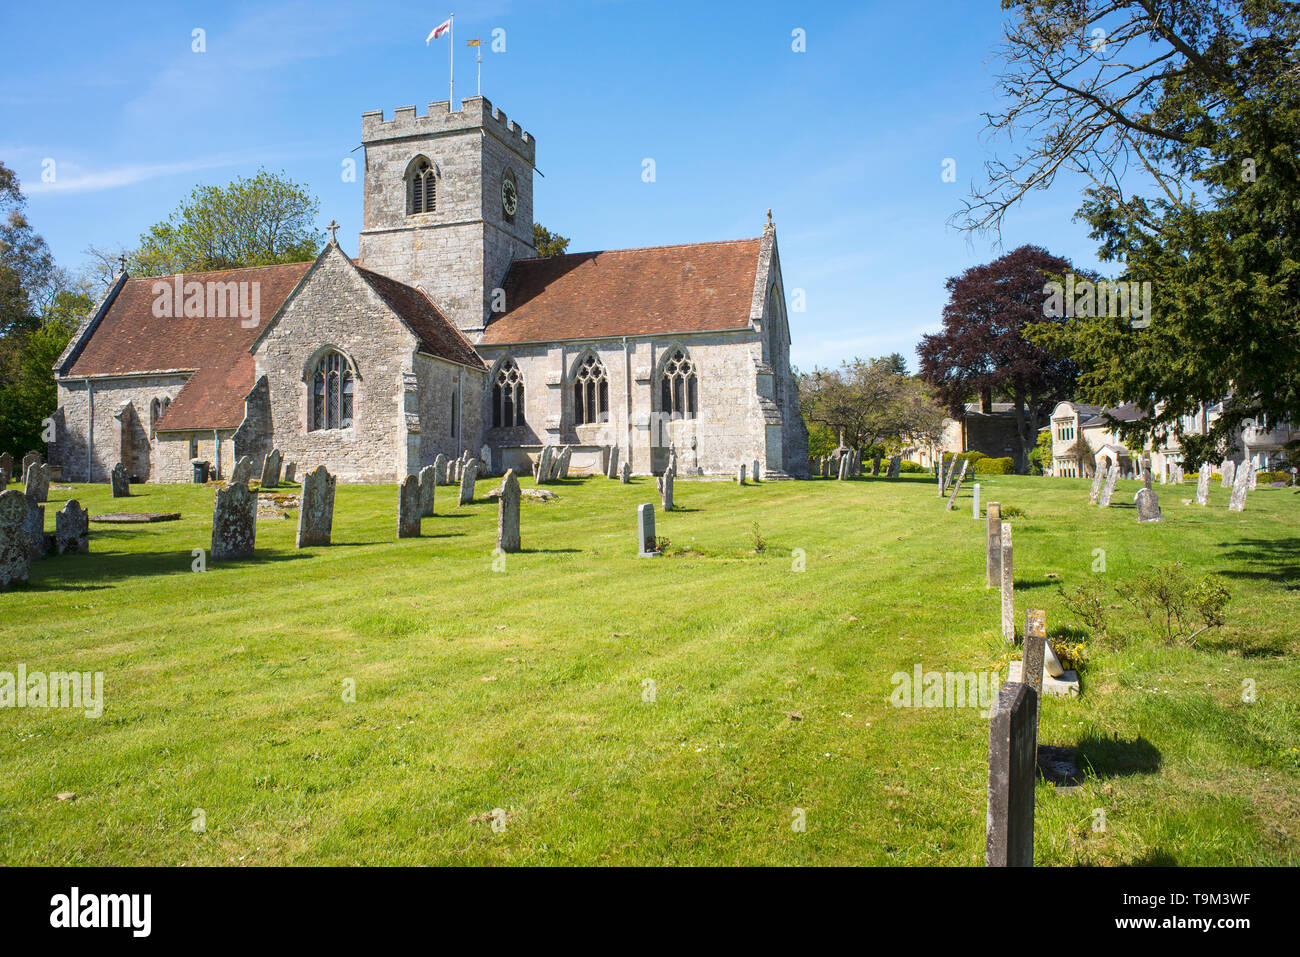 The church of St Mary the Virgin, Dinton, Wiltshire, dates back to the 13th. Much of the current building comprises 14th- and 15th-century It was reno Stock Photo